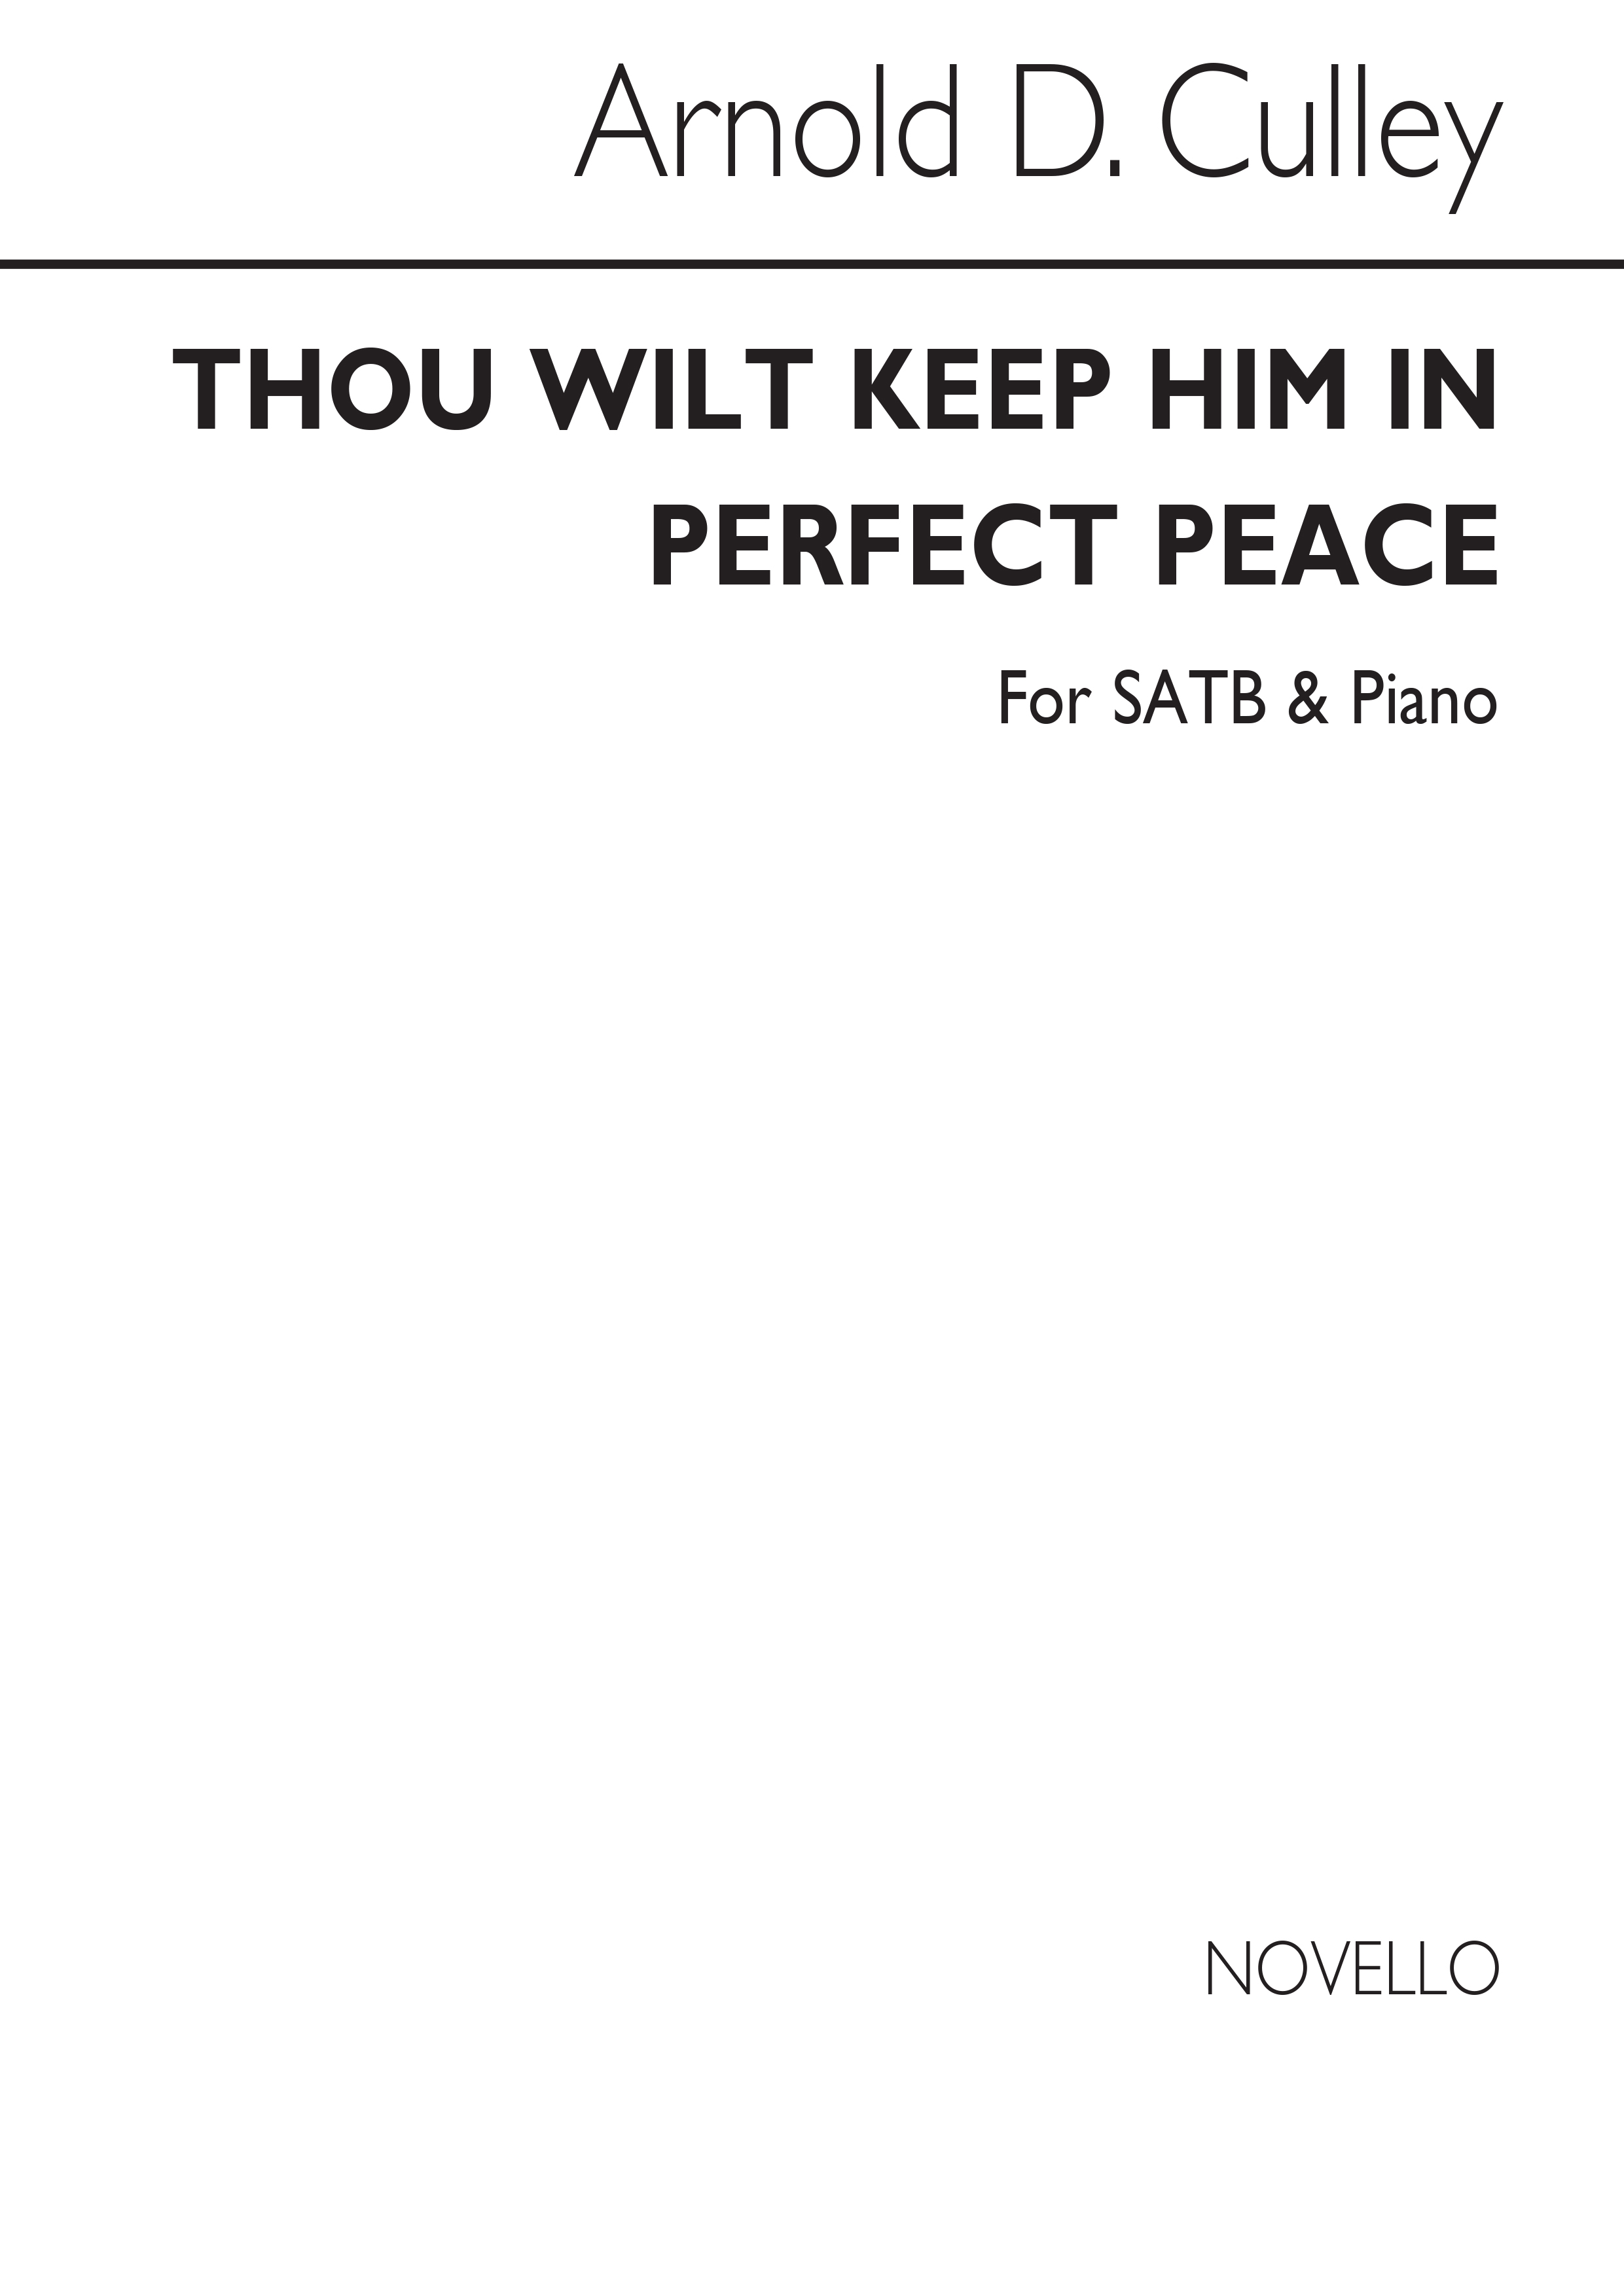 Arnold D. Culley: Thou Wilt Keep Him In Perfect Peace: SATB: Vocal Score